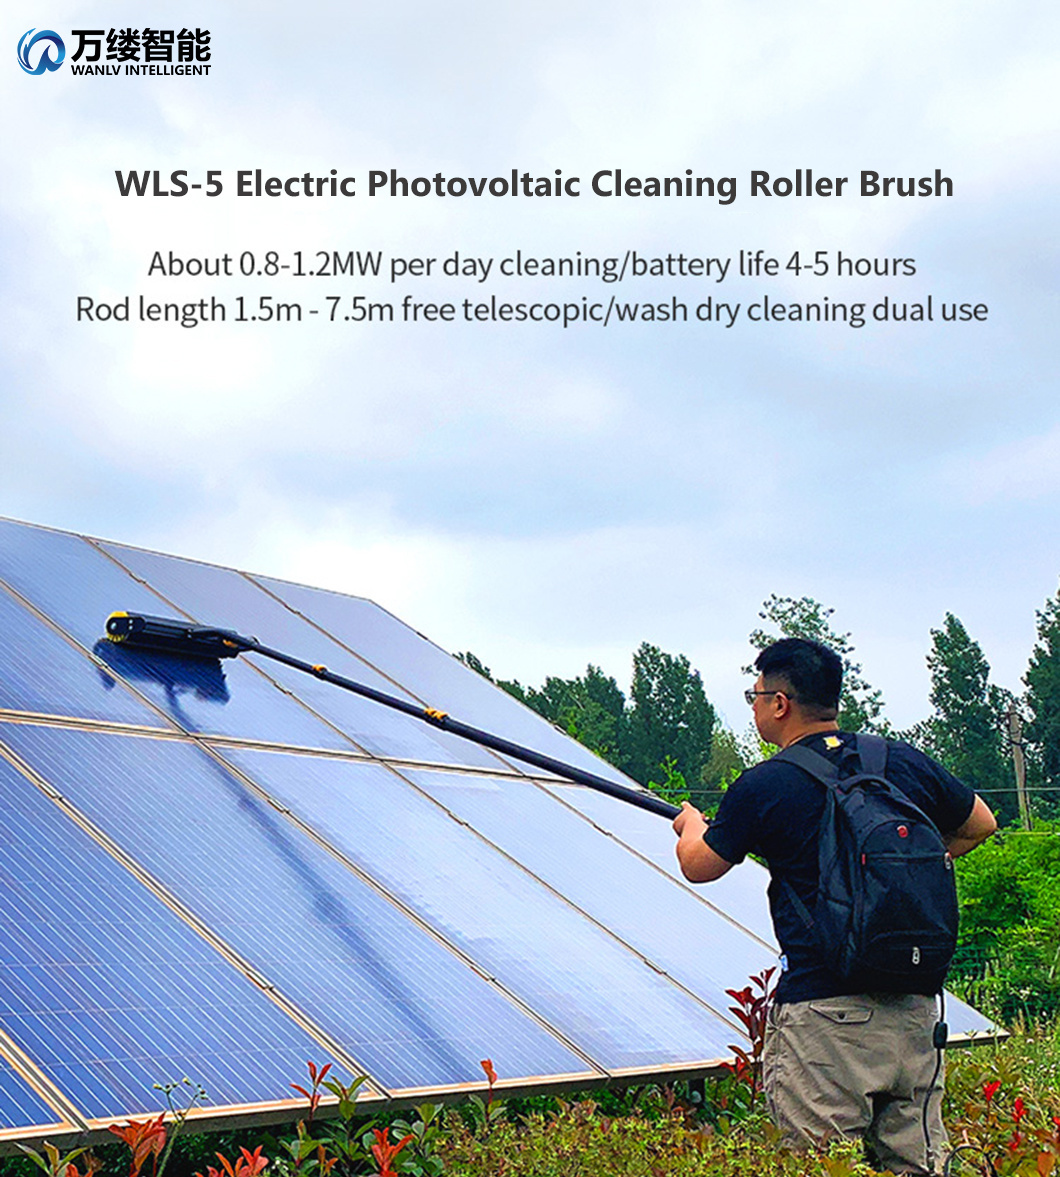 Widely Used Solar Panel Cleaning Machine Solar Panel Cleaning System with 60 Cm Rolling Brush for Photovoltaic Panel Cleaning